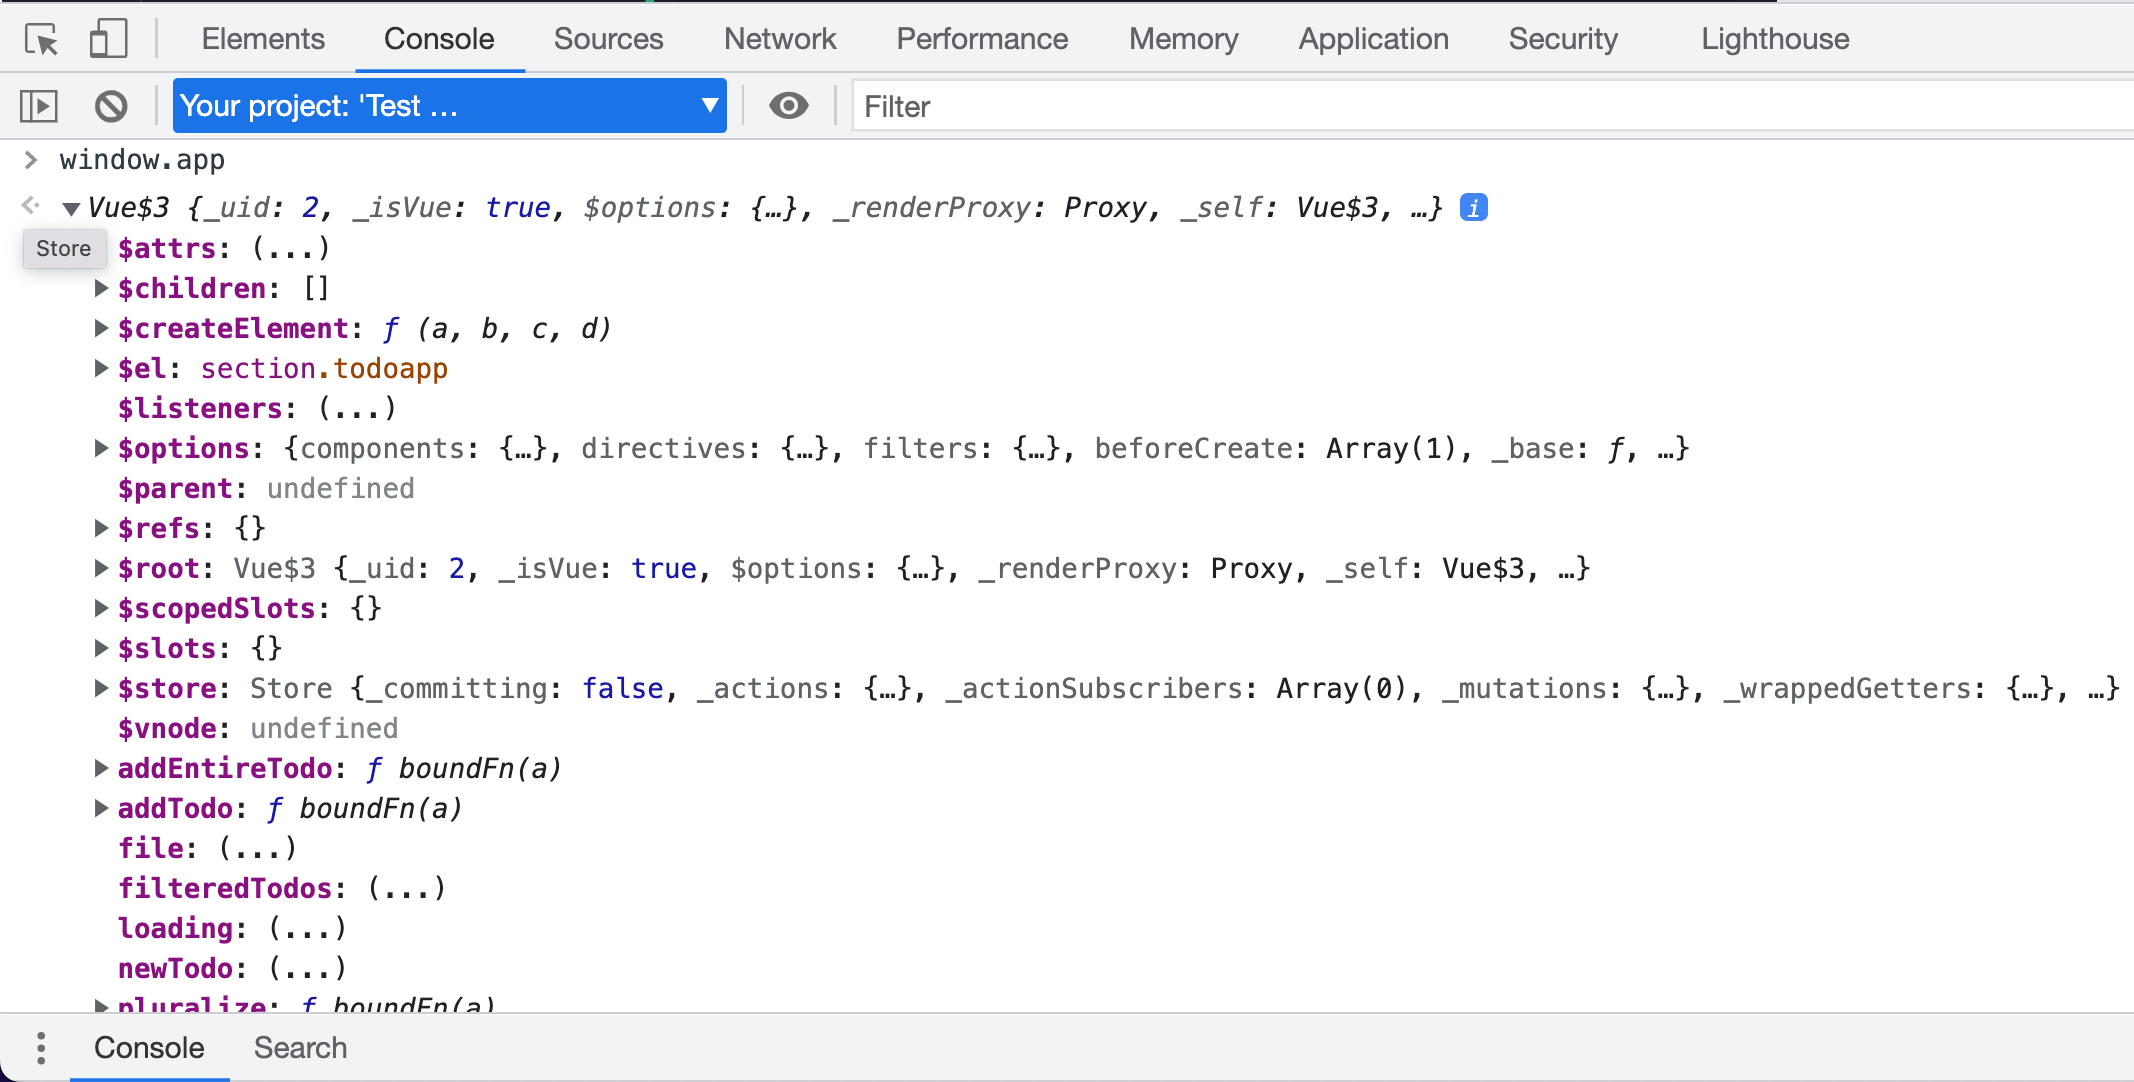 You can access the window.app object from the browser DevTools